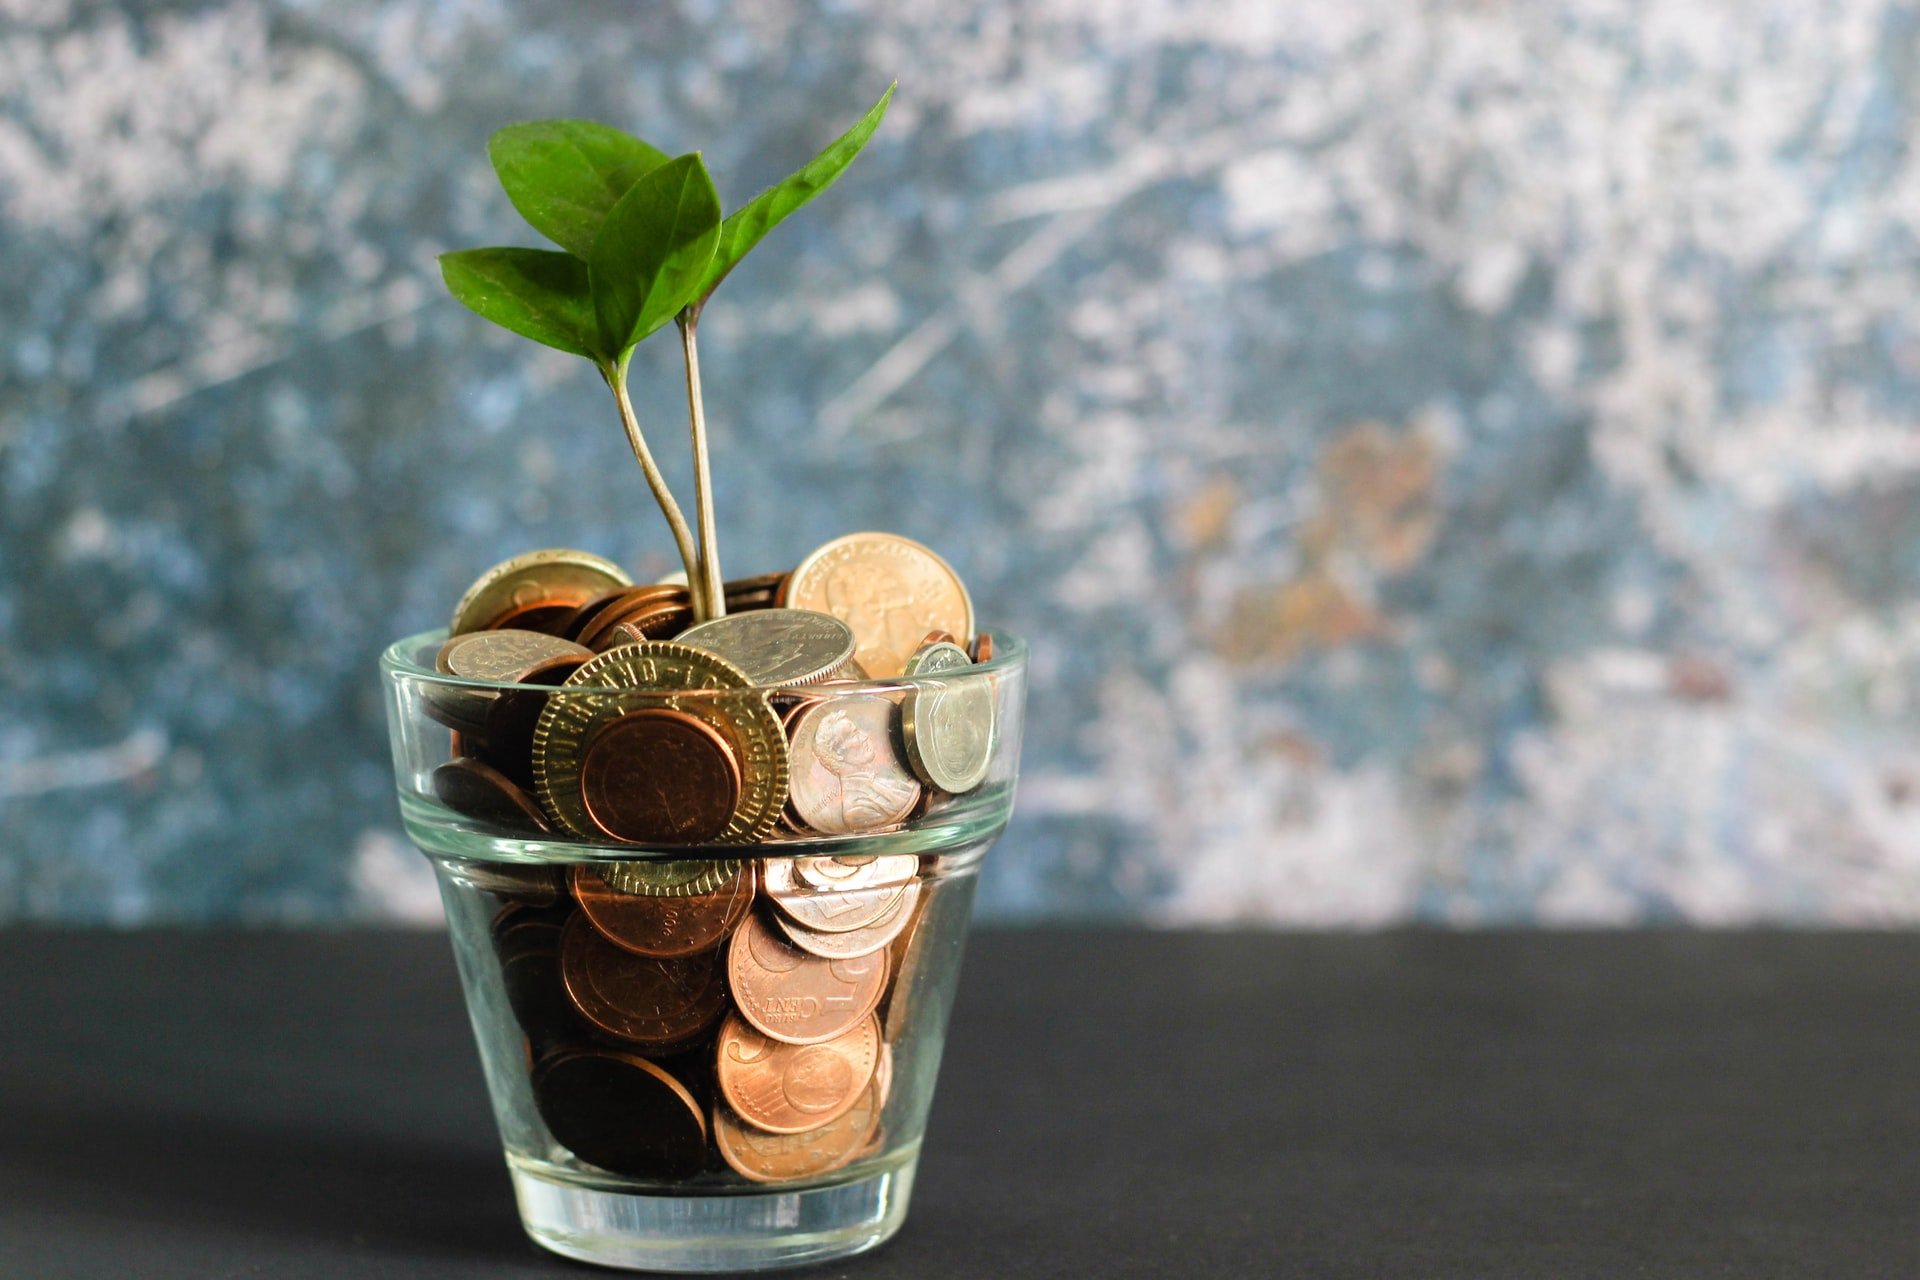 a plant growing in a pot of money to represent showing your potential for growth